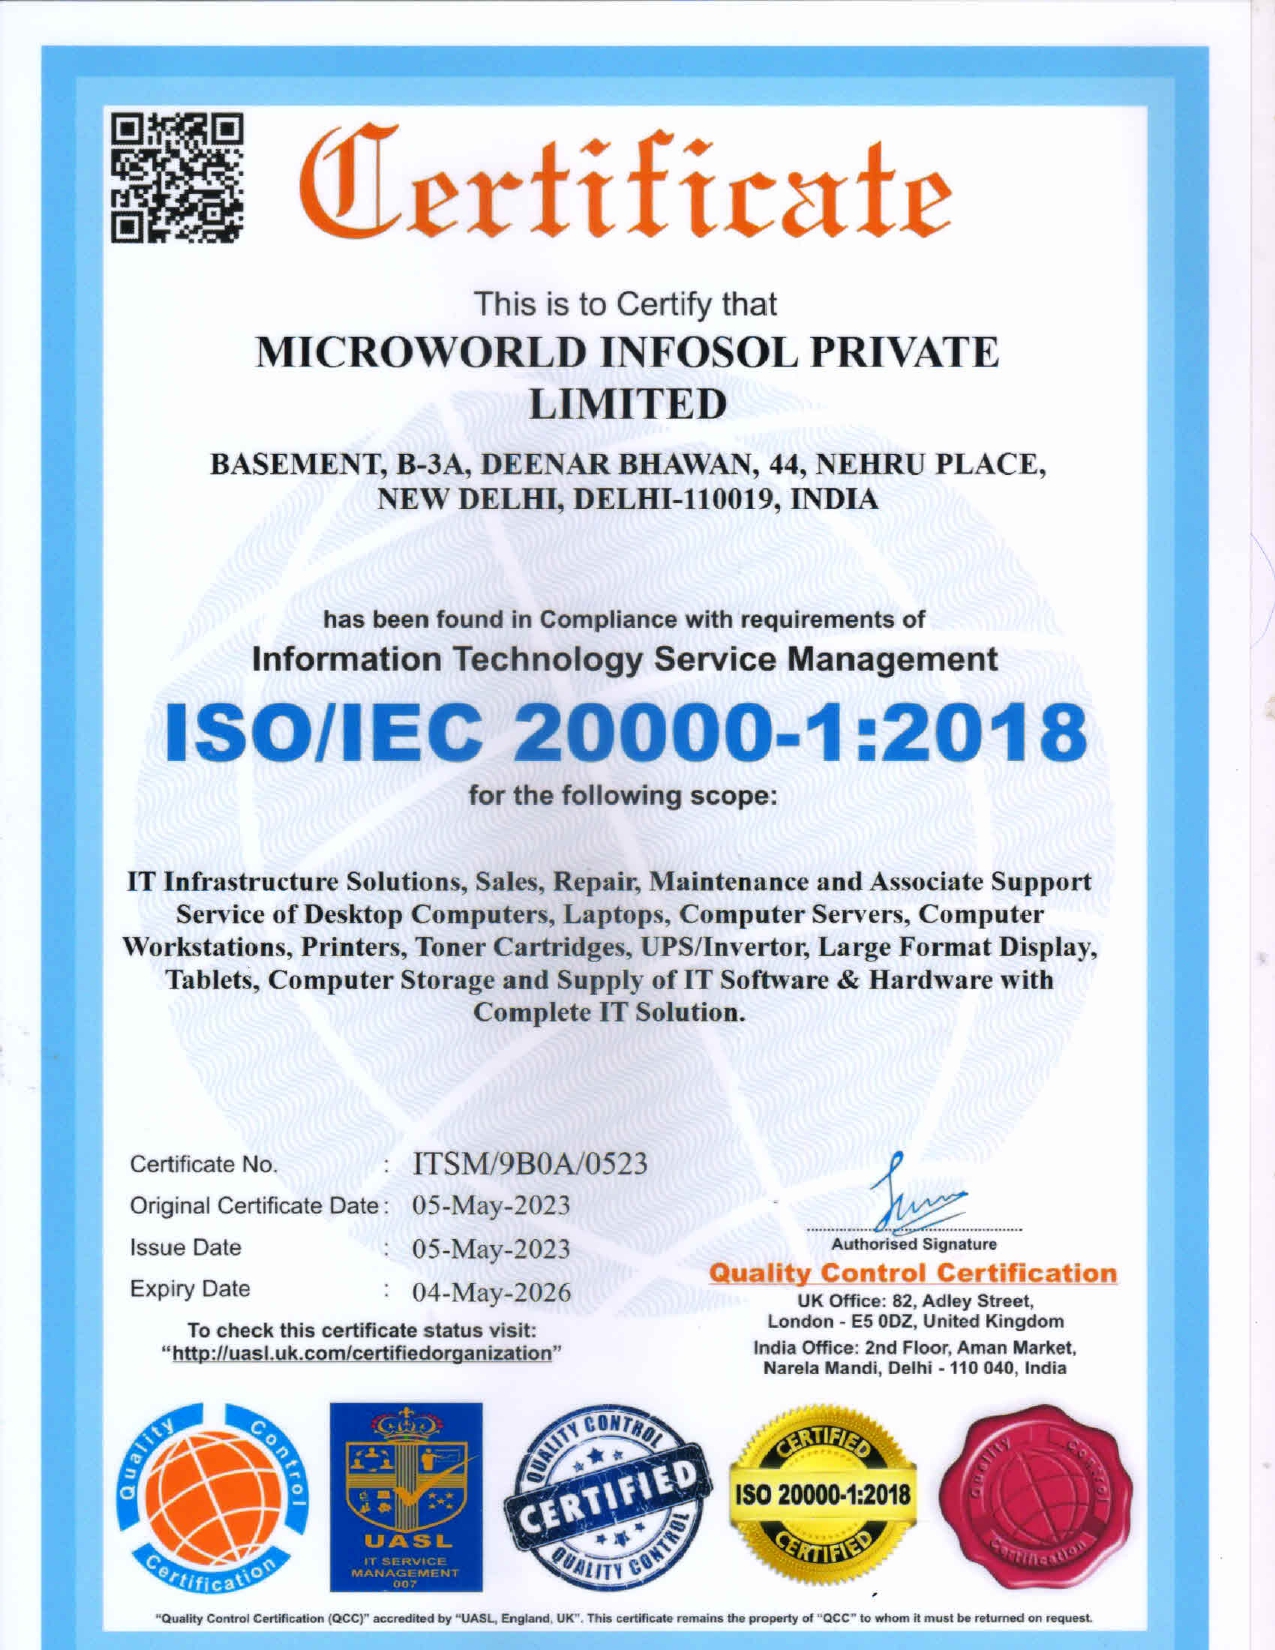 Microworld Infosol's certification for excellence for Information Technology Service Management, showcasing our commitment to high-quality products and services.